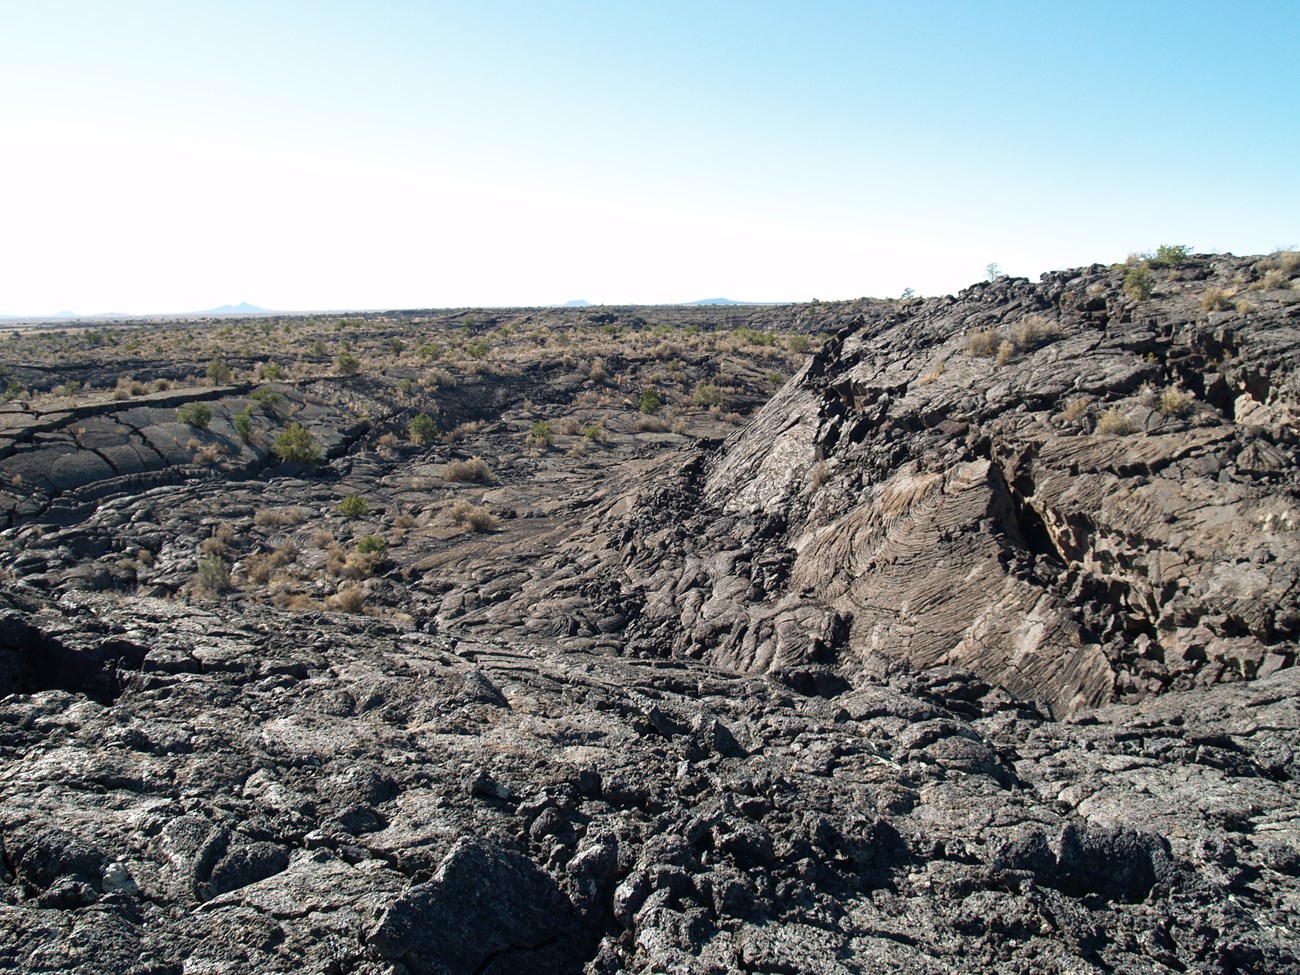 photo of barren rocky land surface with slight depression